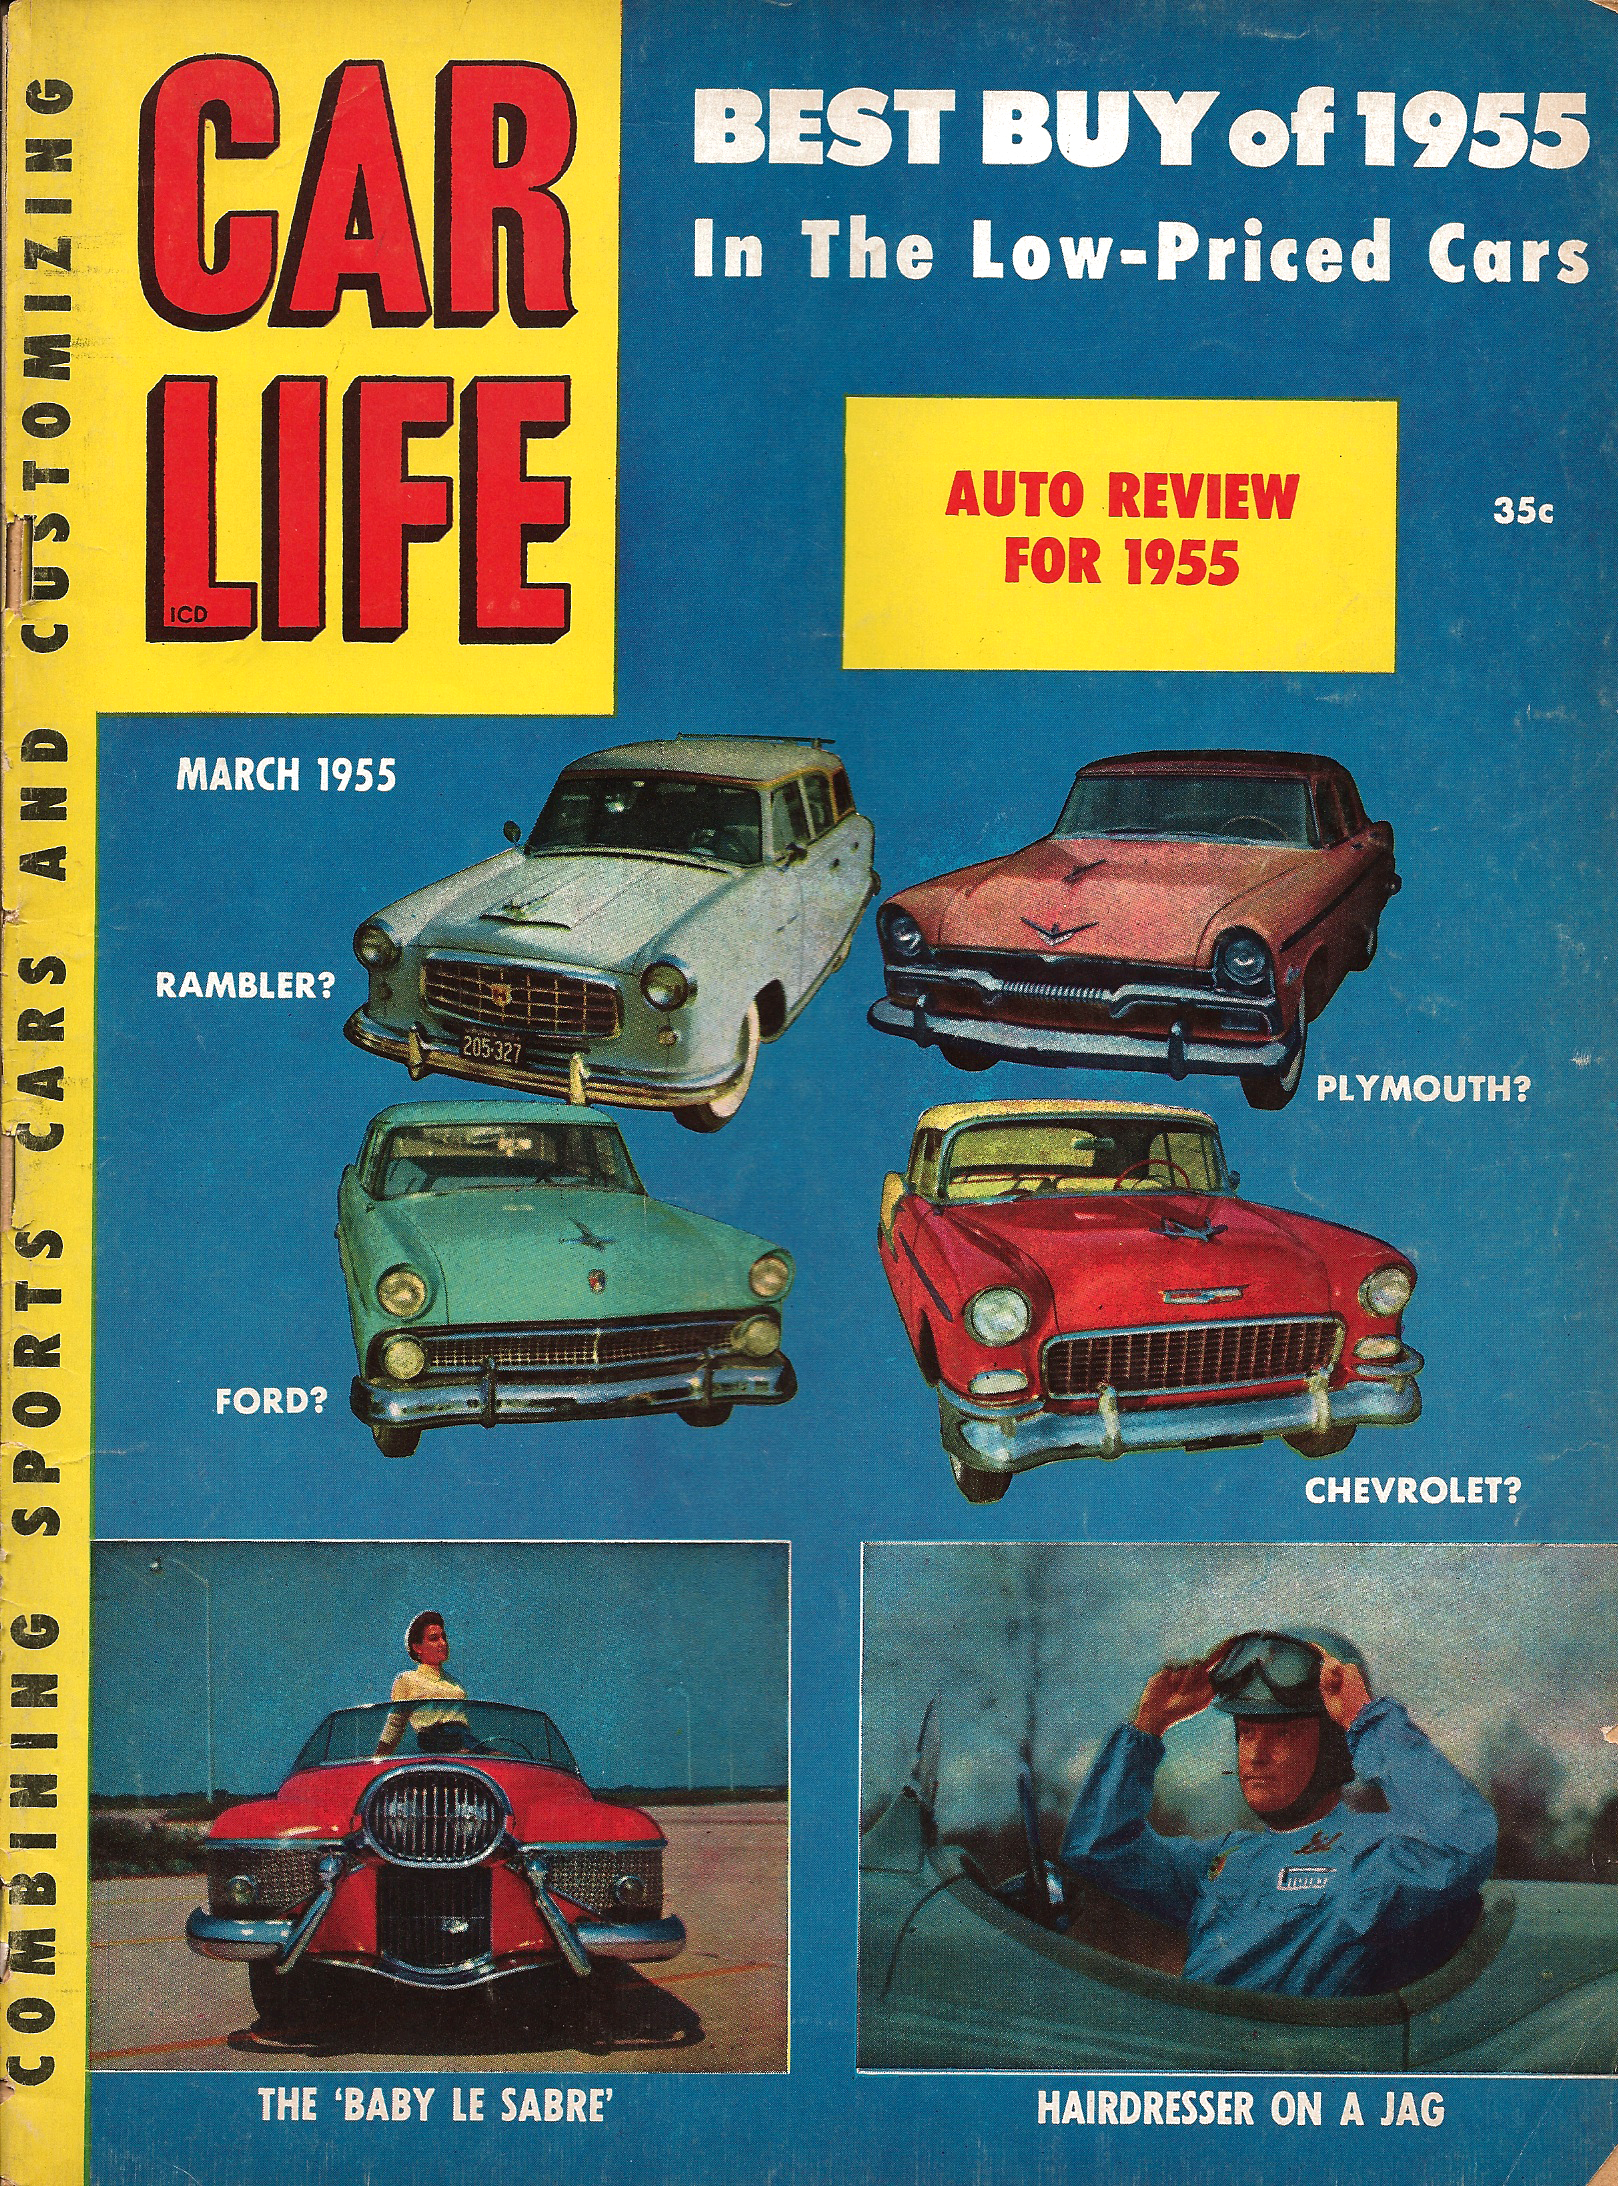 Valkyrie at the L'Automobile, December 1954, Car Life, March 1955